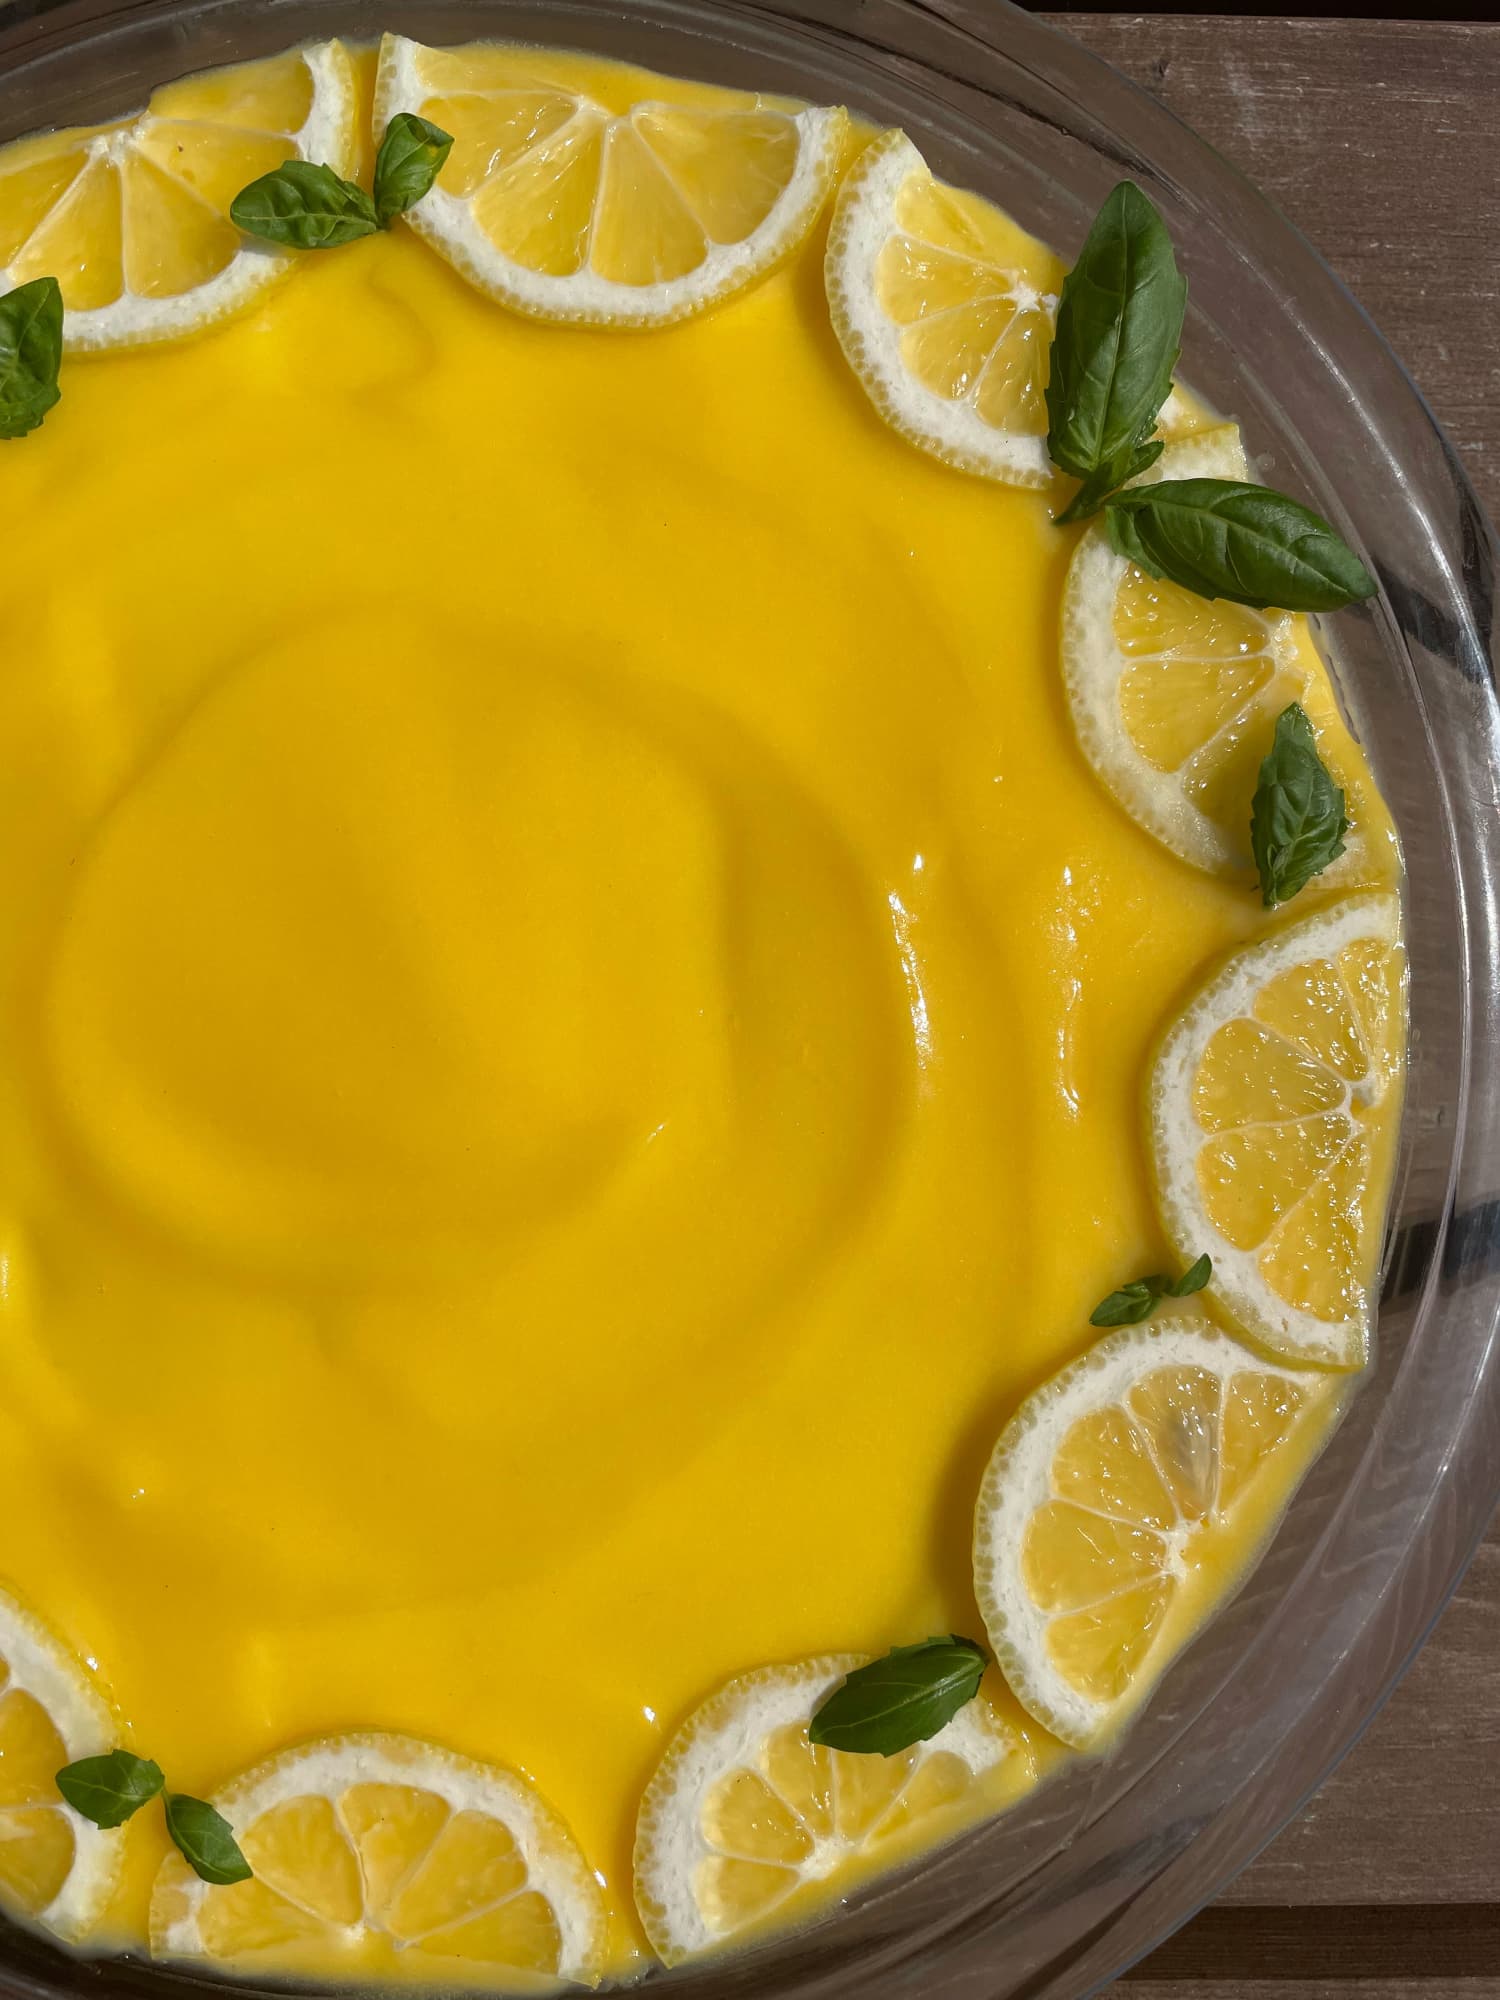 I Tried the Wildly Popular Recipe for Lemon Tiramisu, and It’s the Ultimate Summer Dessert